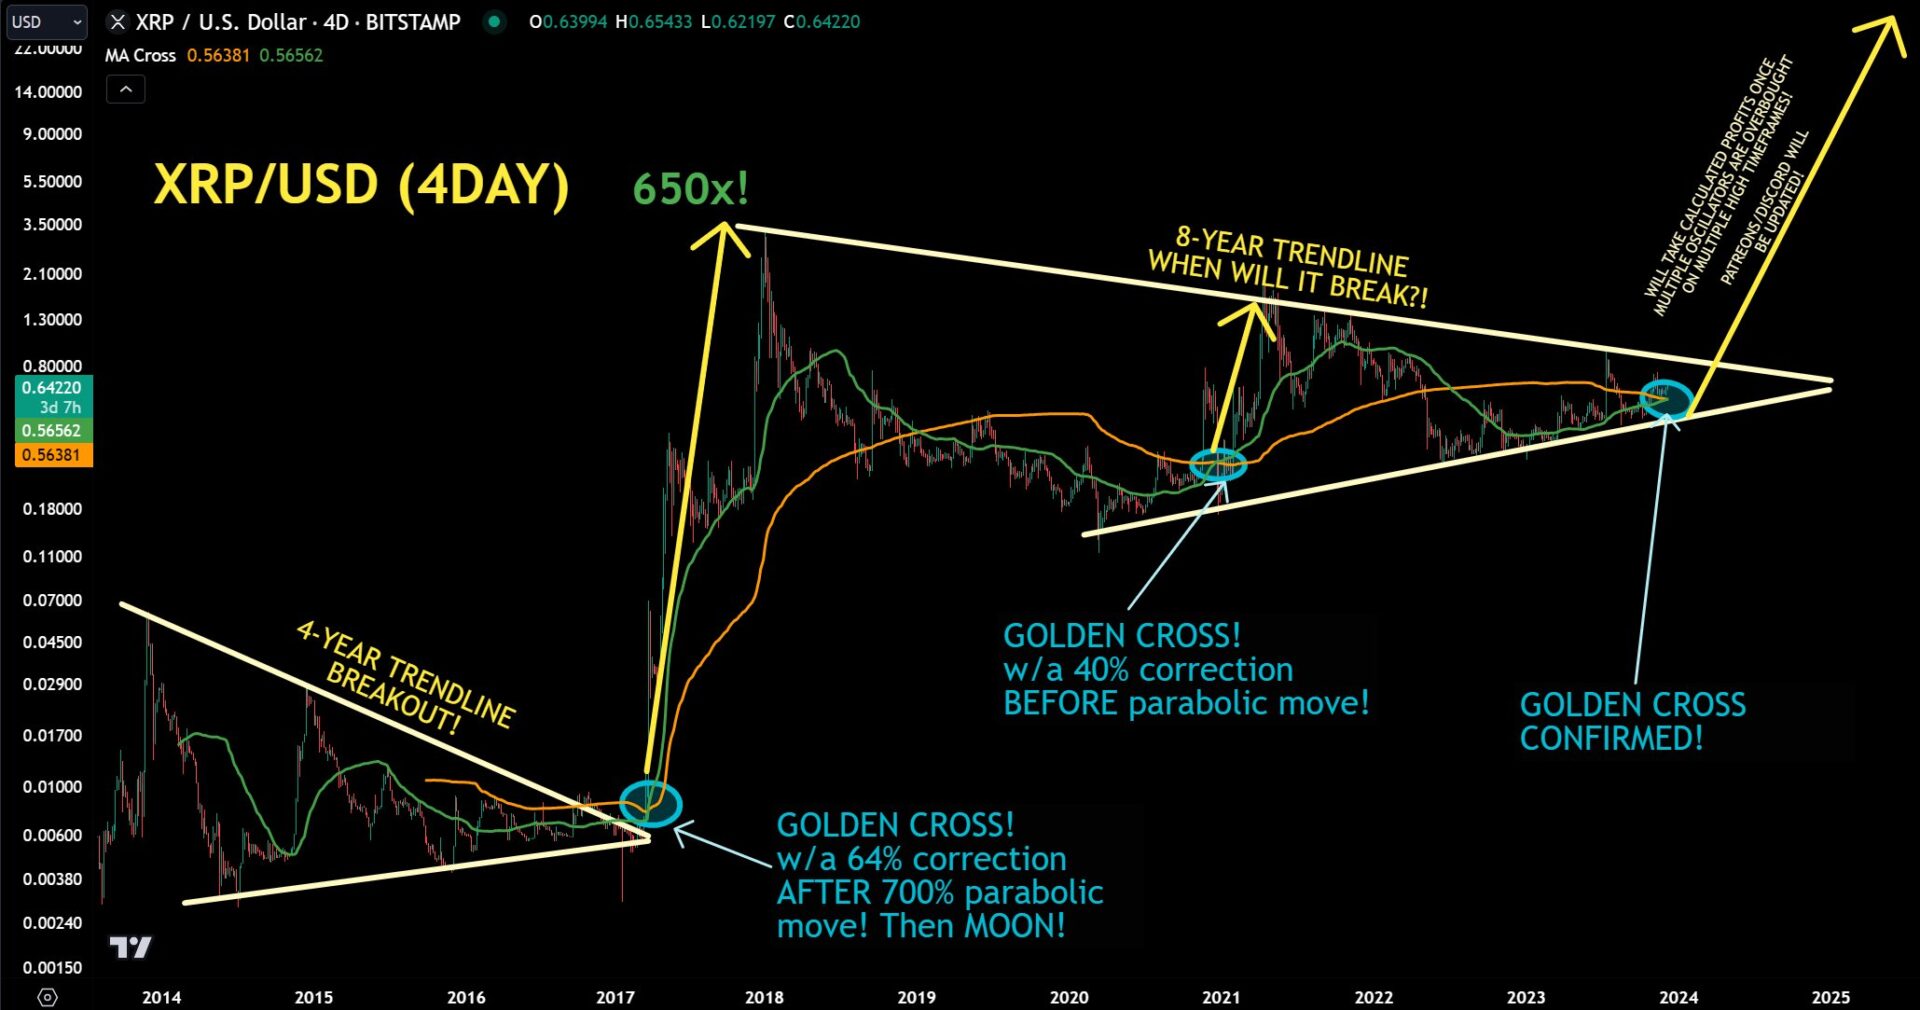 XRP Price Is Set For Meteoric Surge? Analyst Confirms 1000% Golden Cross Is Back